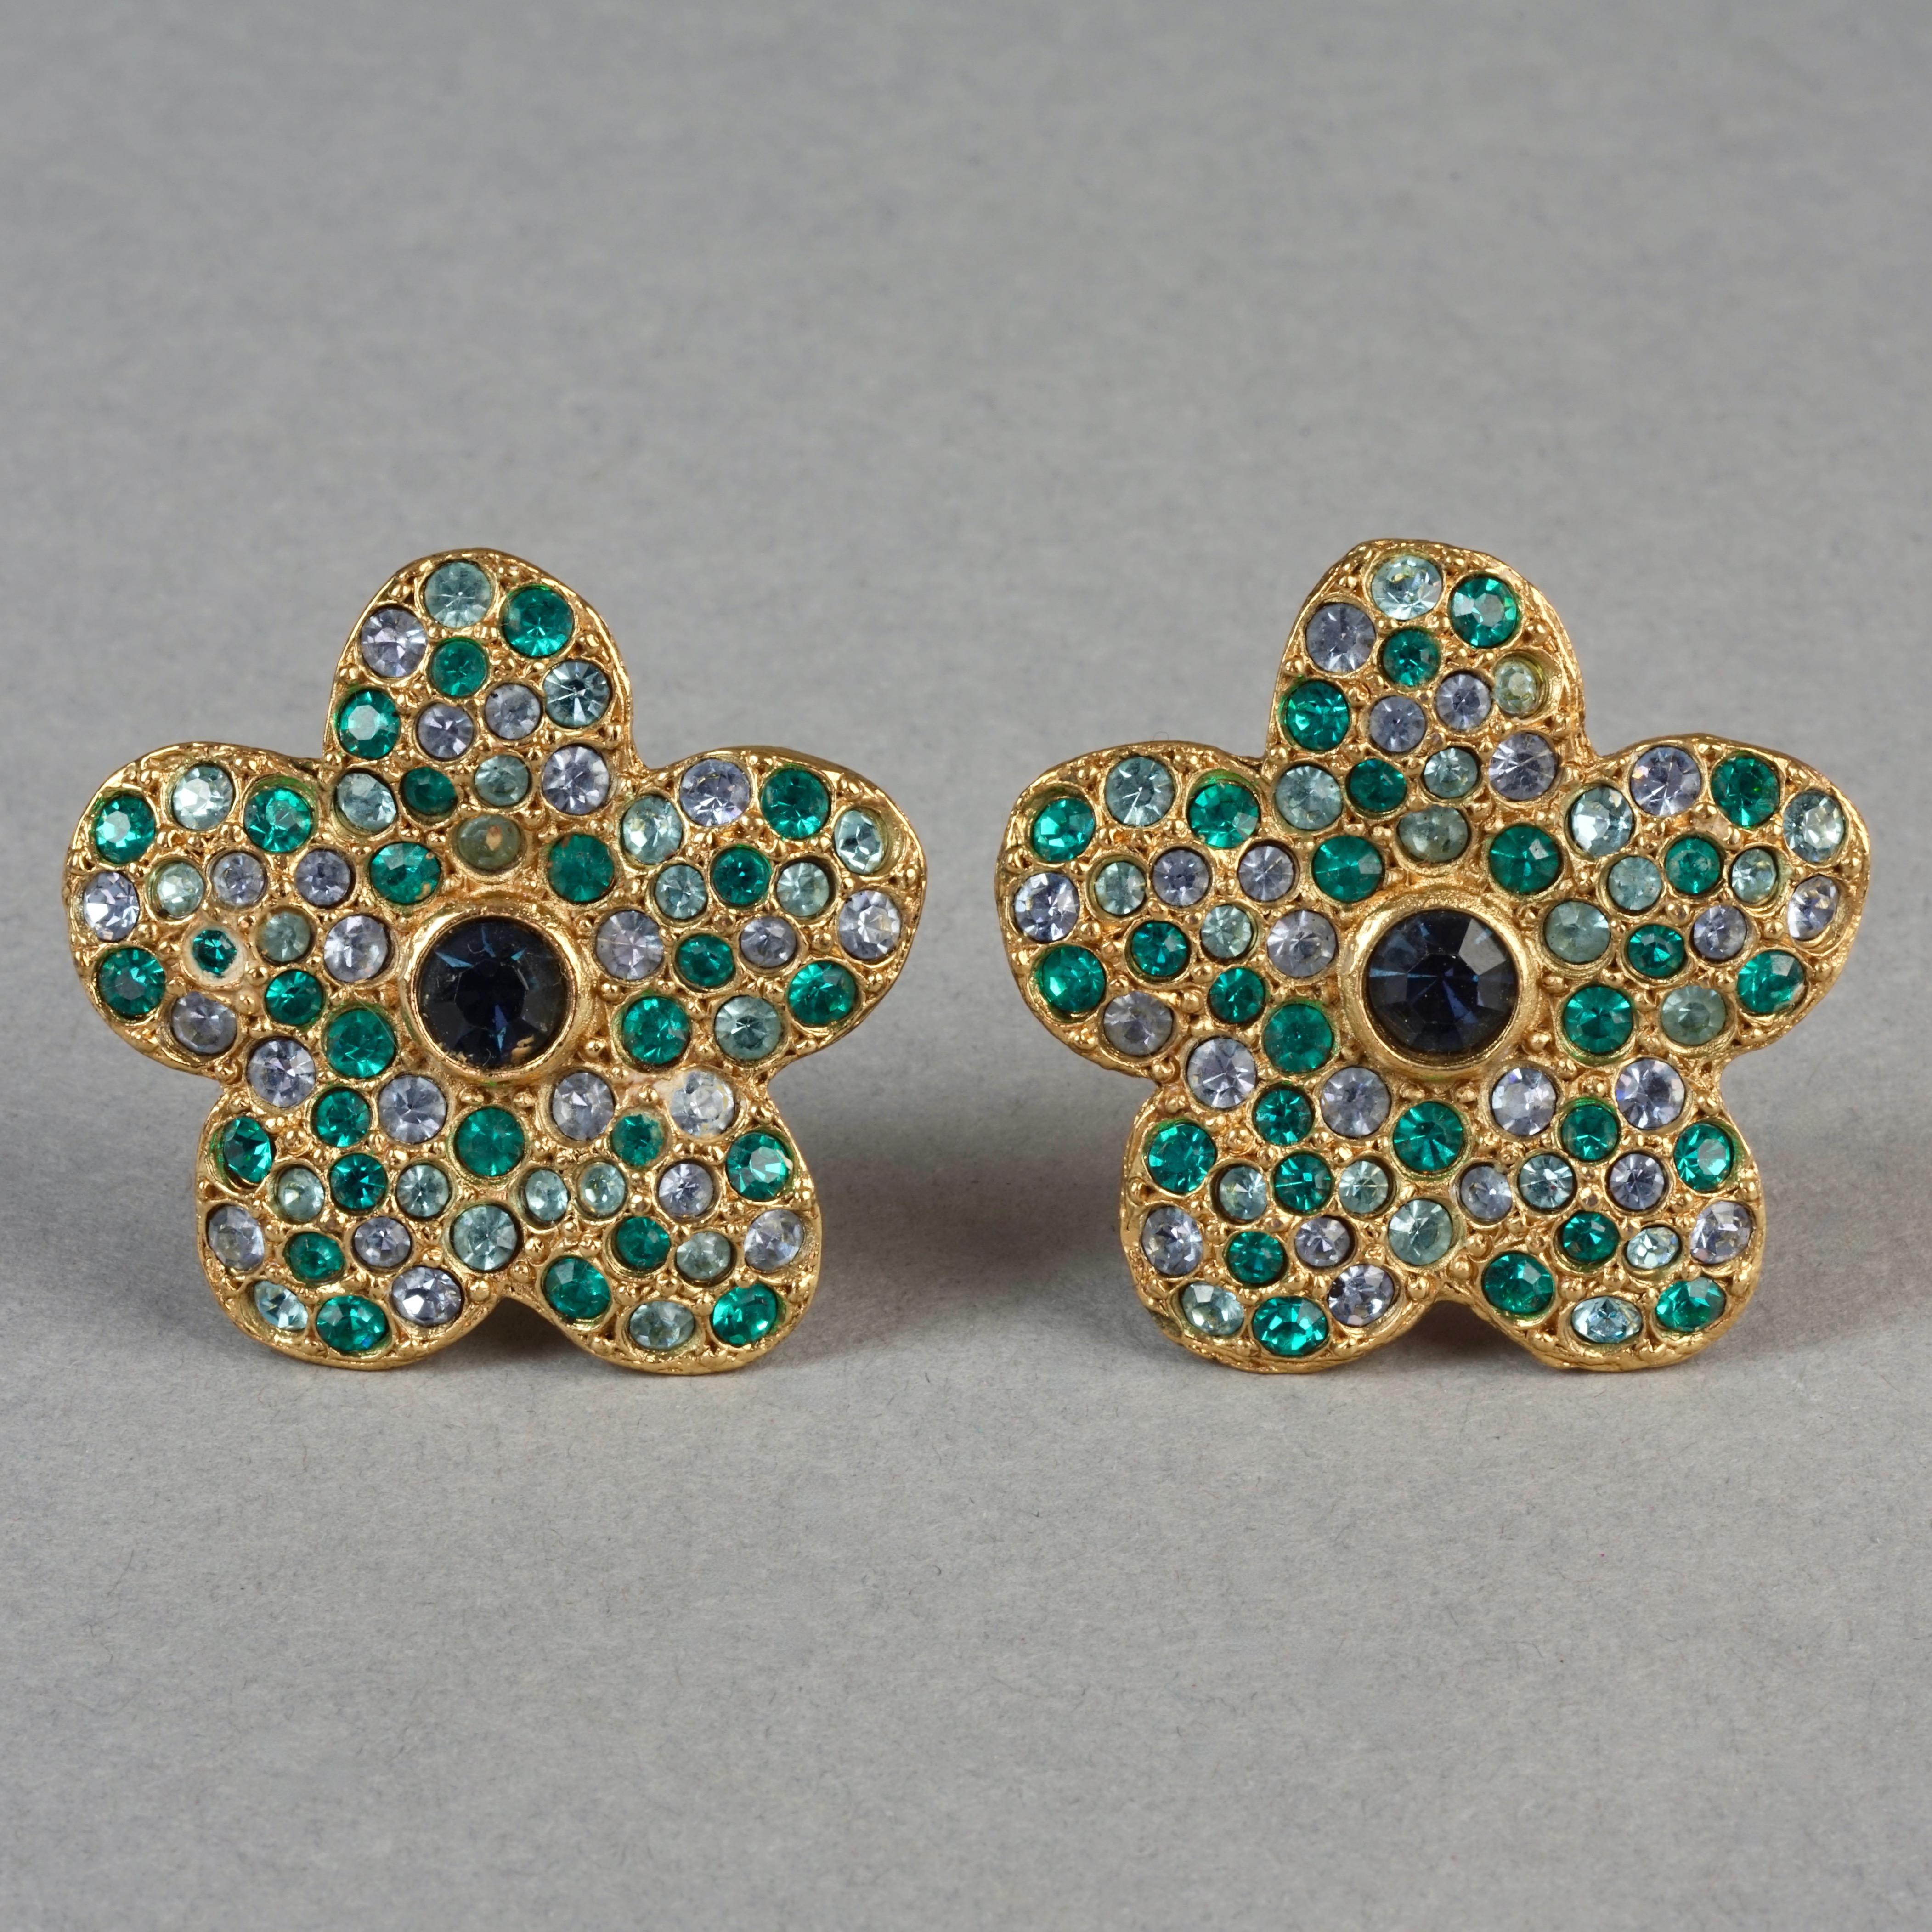 Vintage YVES SAINT LAURENT Ysl Flower Rhinestone Studded Earrings In Excellent Condition For Sale In Kingersheim, Alsace